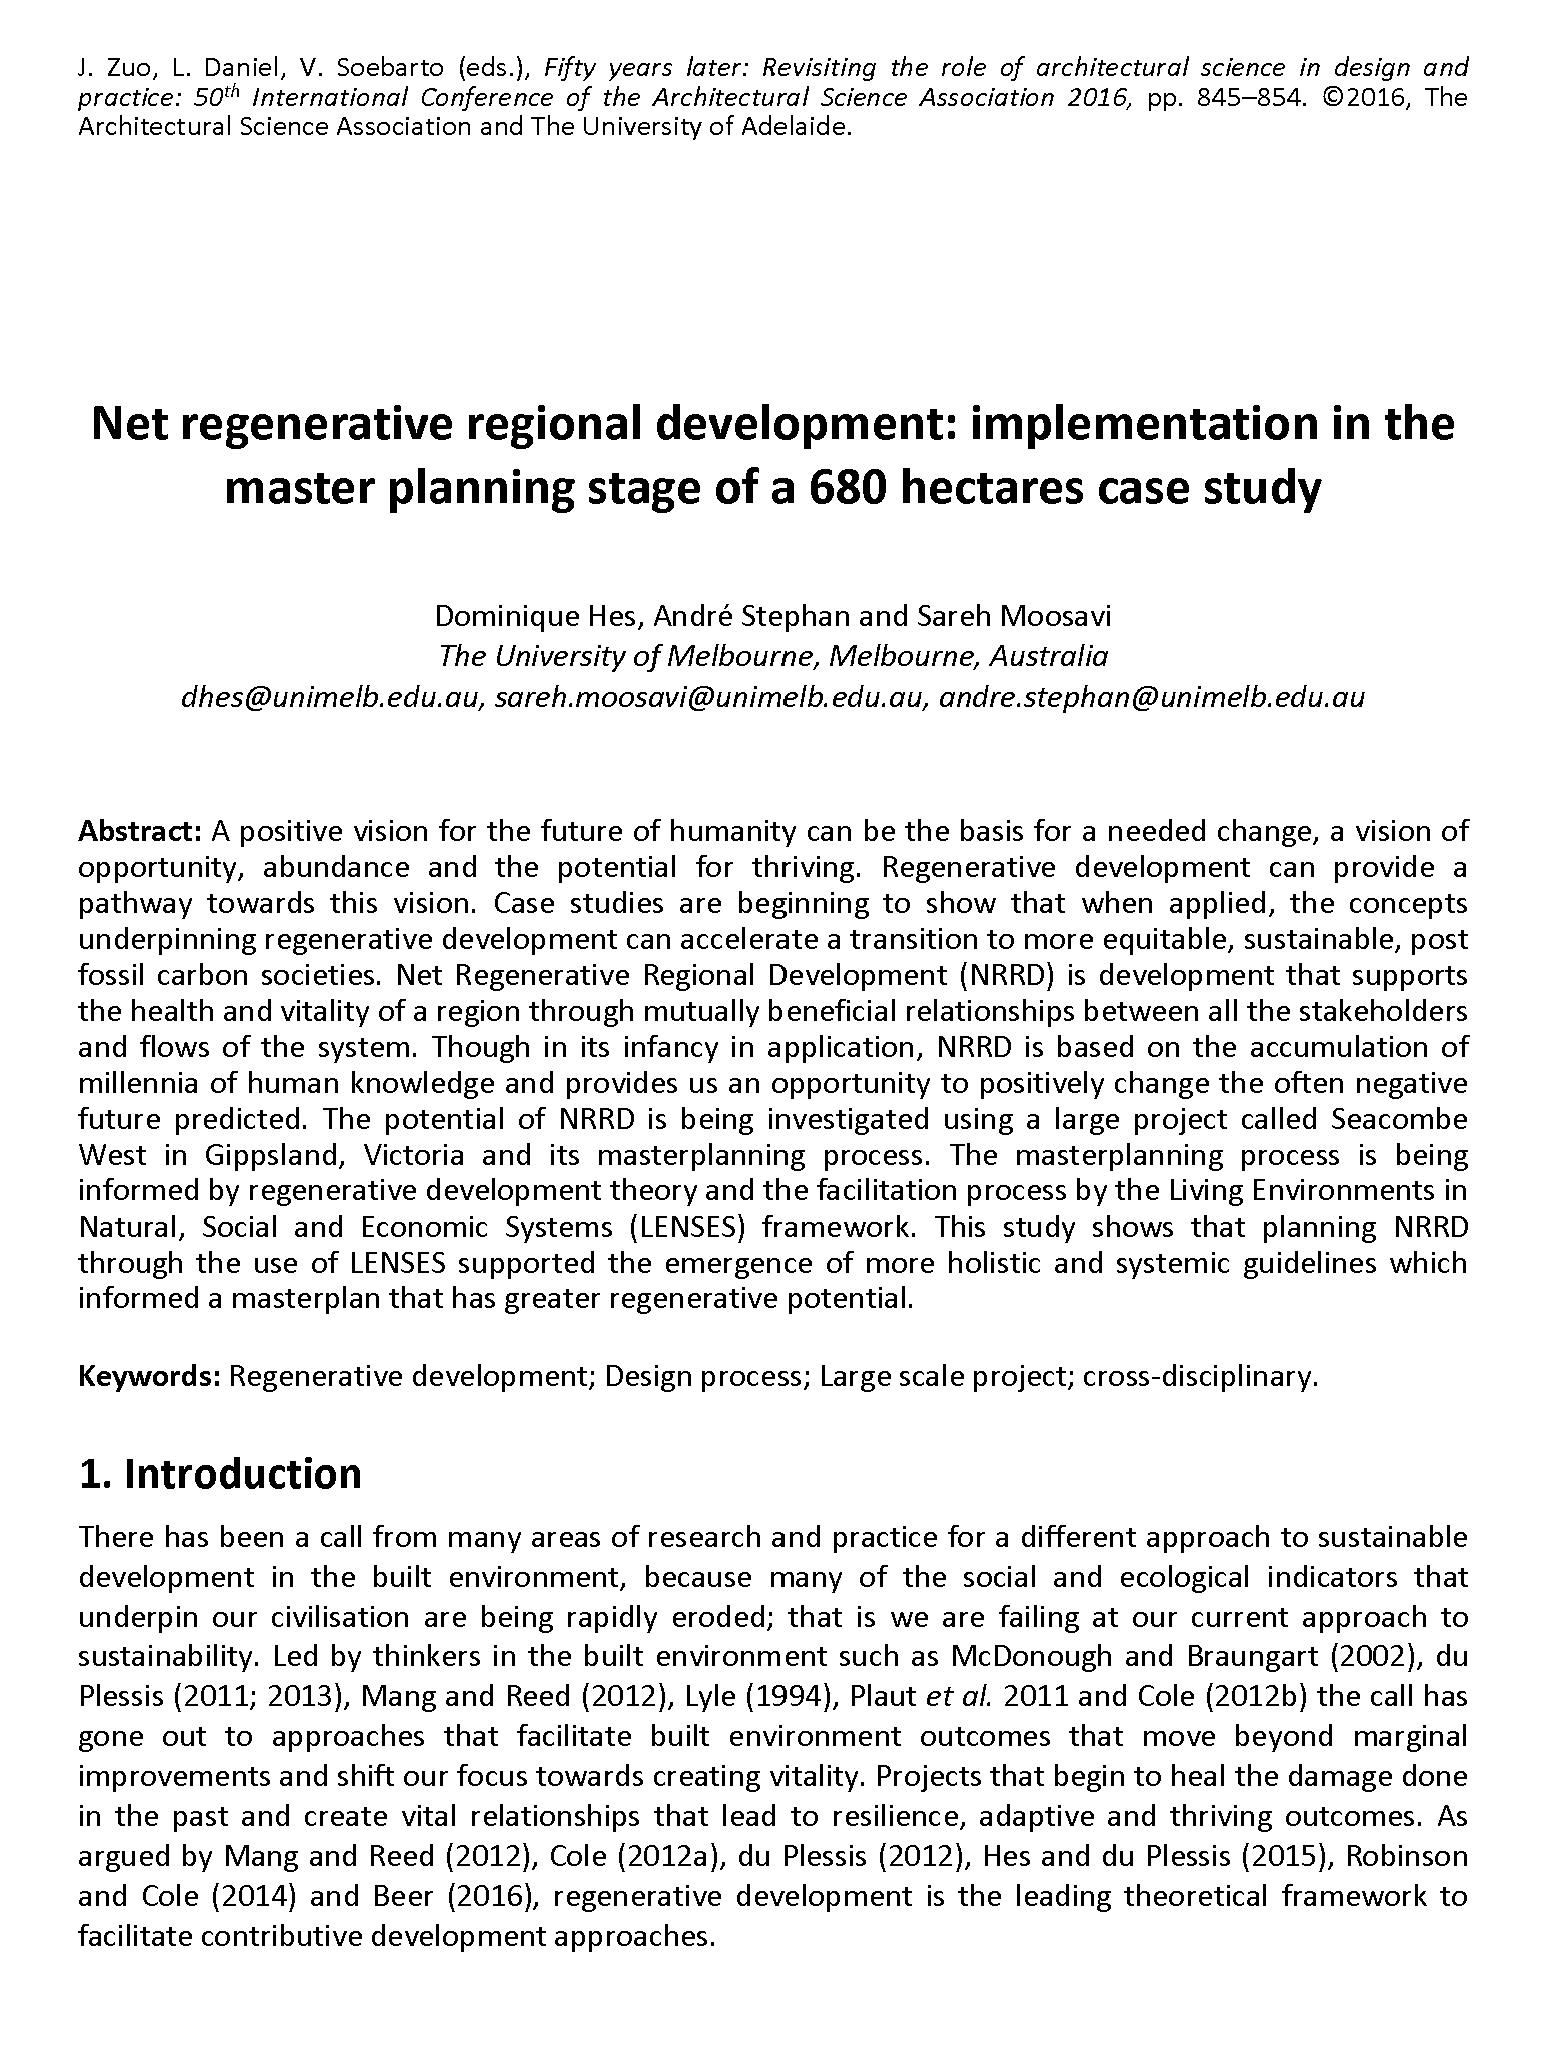 Net regenerative regional development: implementation in the masterplanning stage of a 680 hectares case study